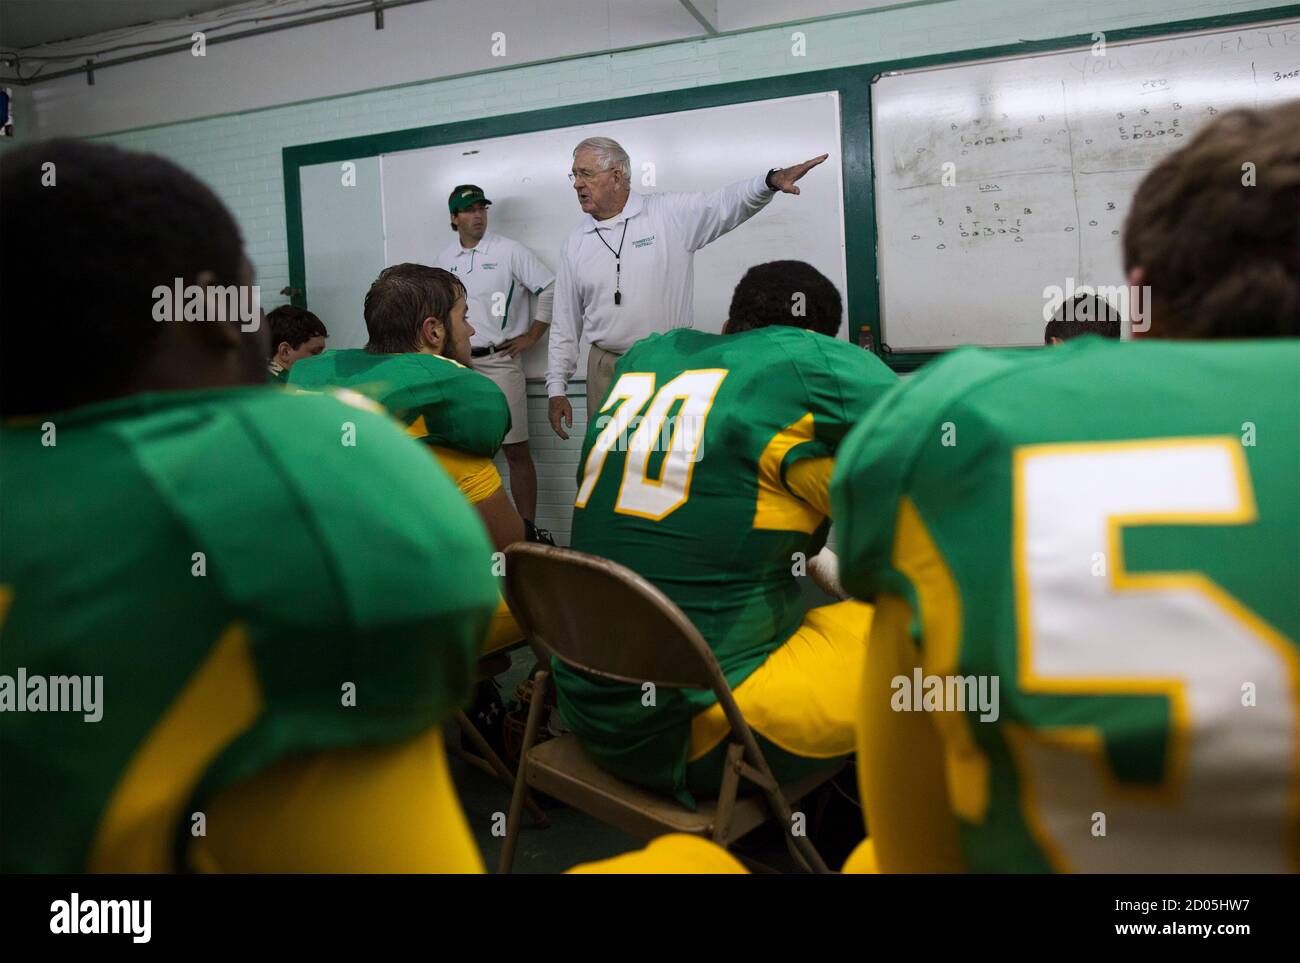 Summerville High School athletic director and head football coach John  McKissick (C) talks to players and staff in the locker room during  half-time of a playoff game at Memorial Stadium in Summerville,